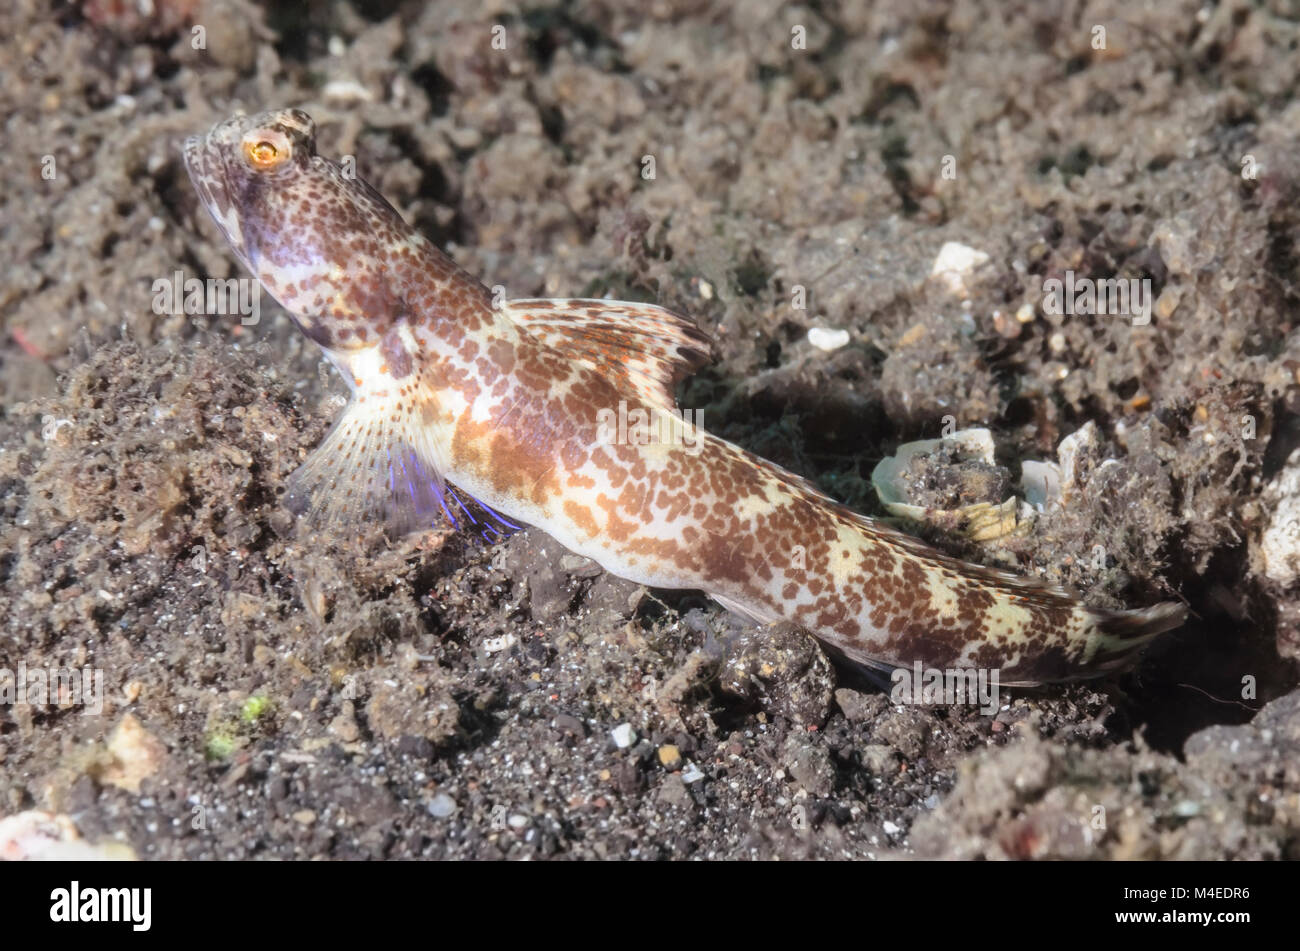 Monster shrimp goby, Tomiyamichthys oni, Lembeh Strait, North Sulawesi, Indonesia, Pacific Stock Photo